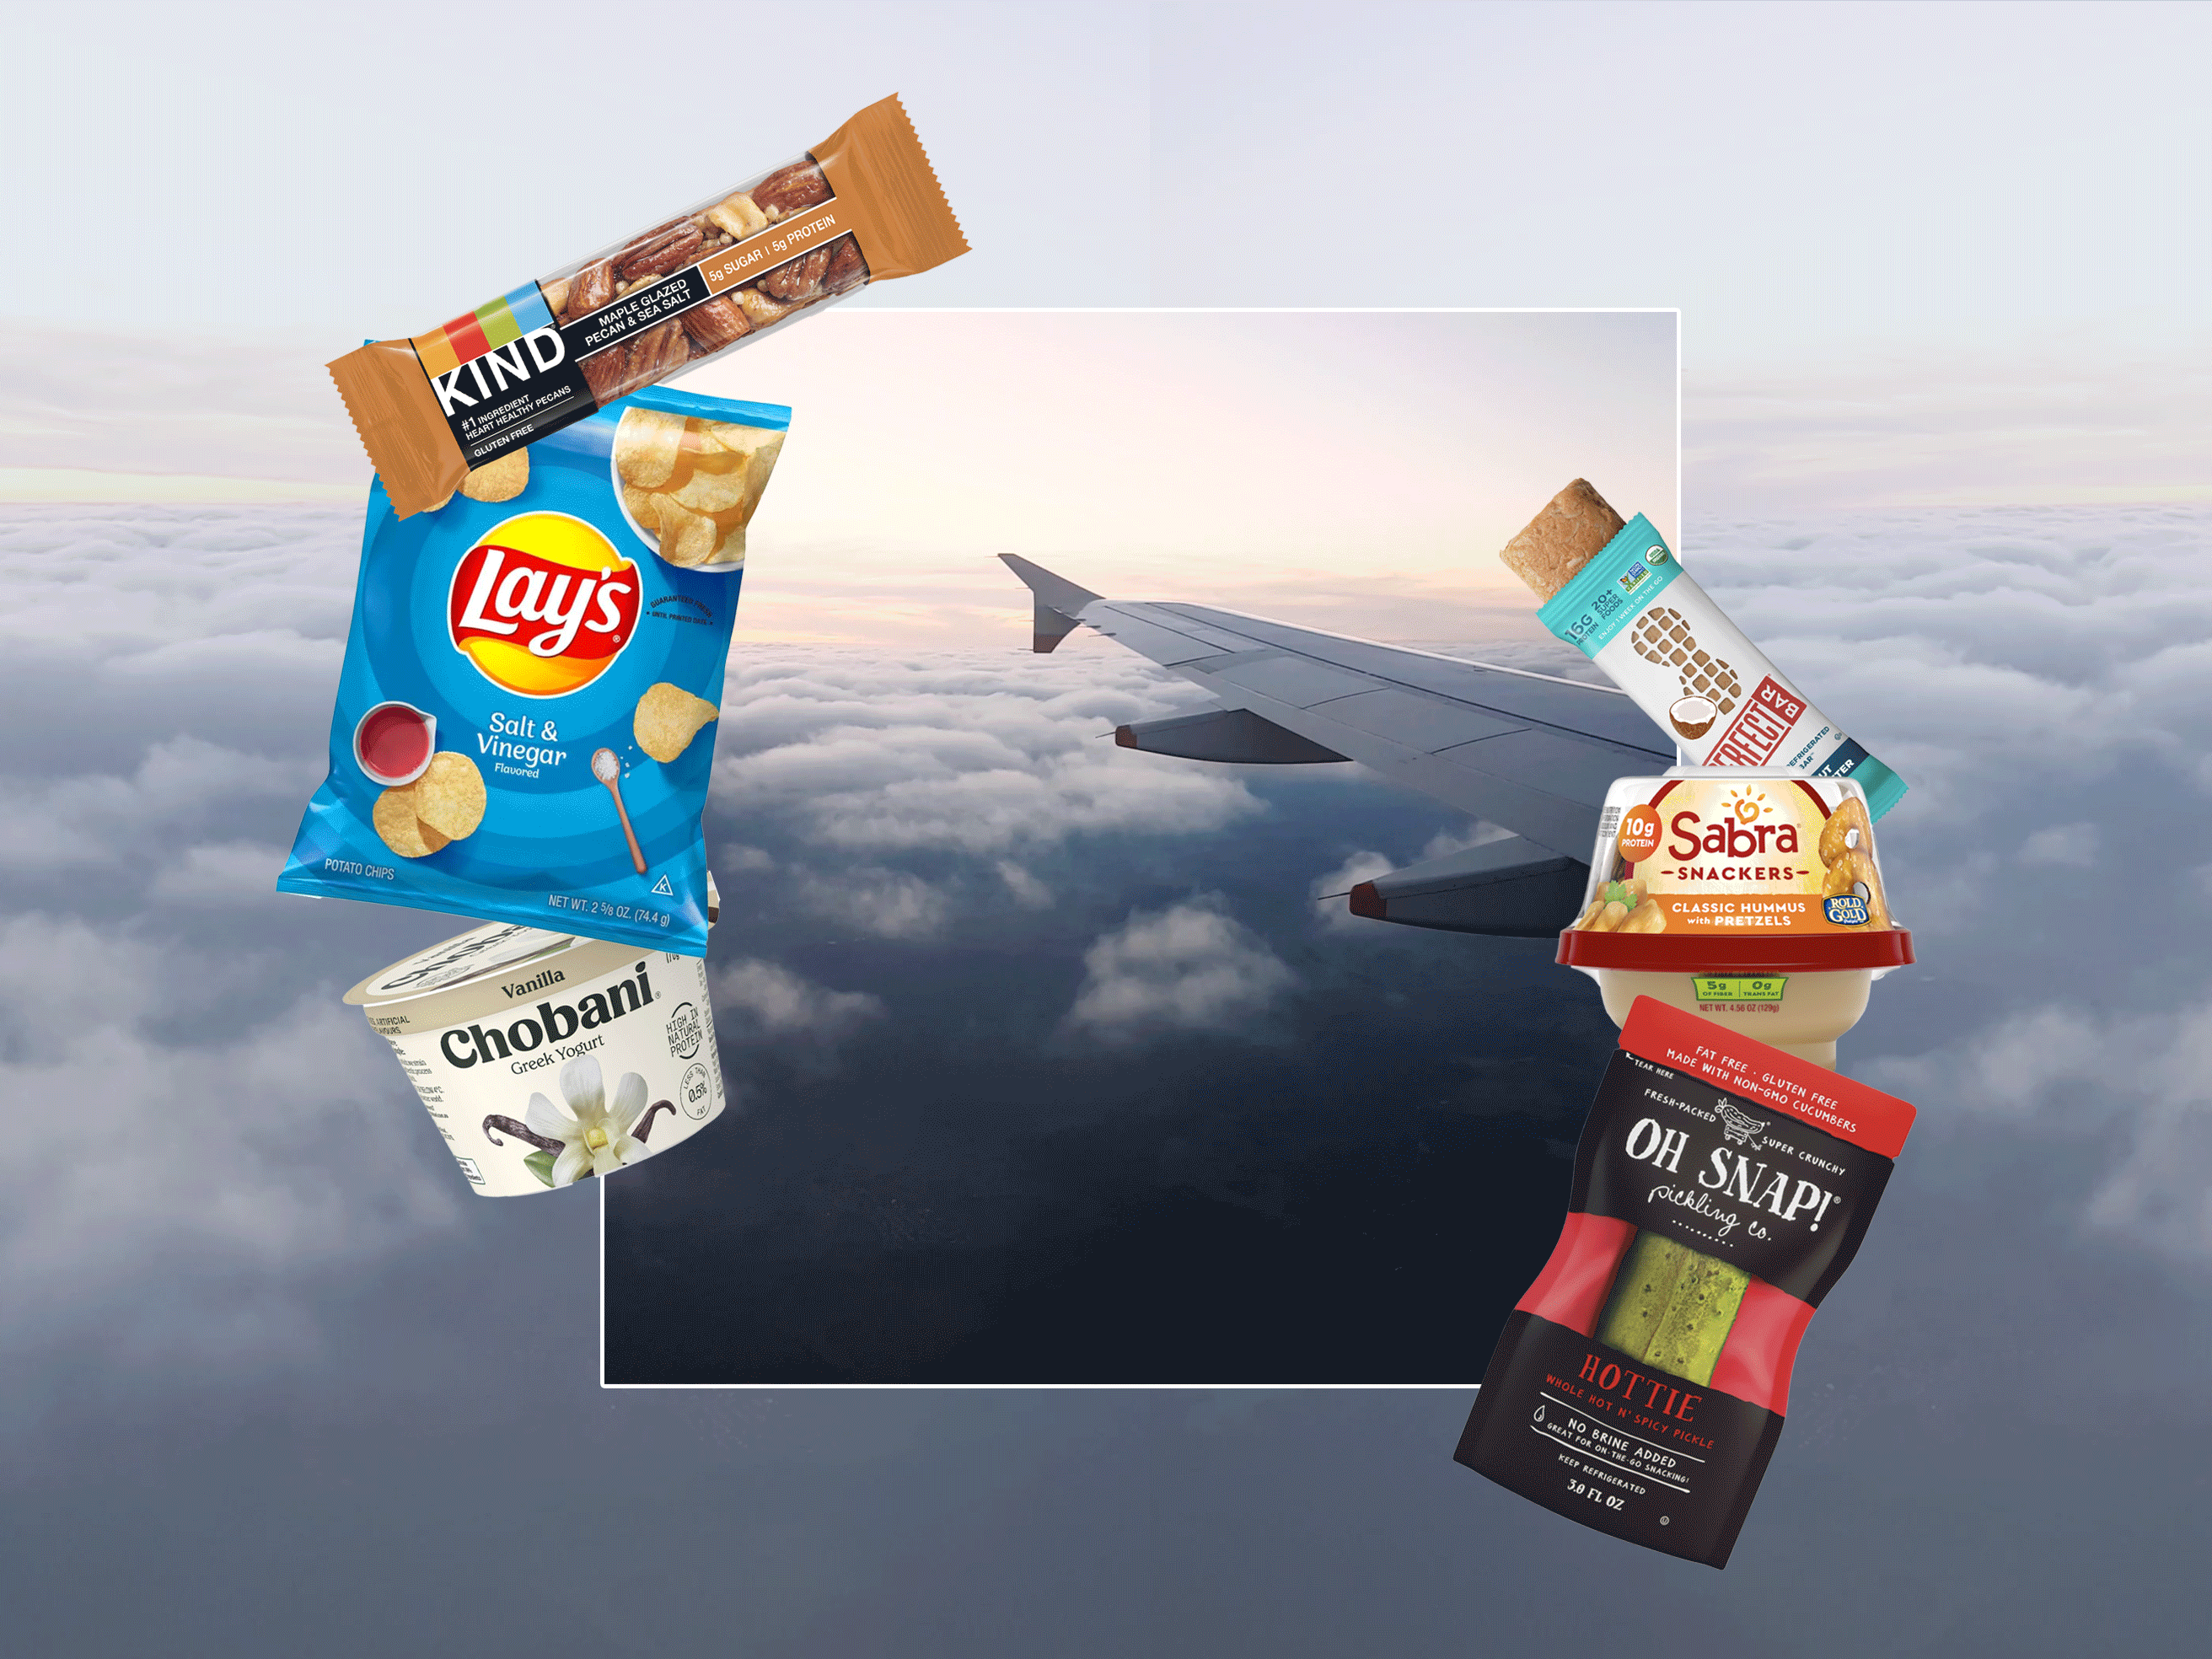 The Best Airport Snacks From Hudson News, According to Our Editors